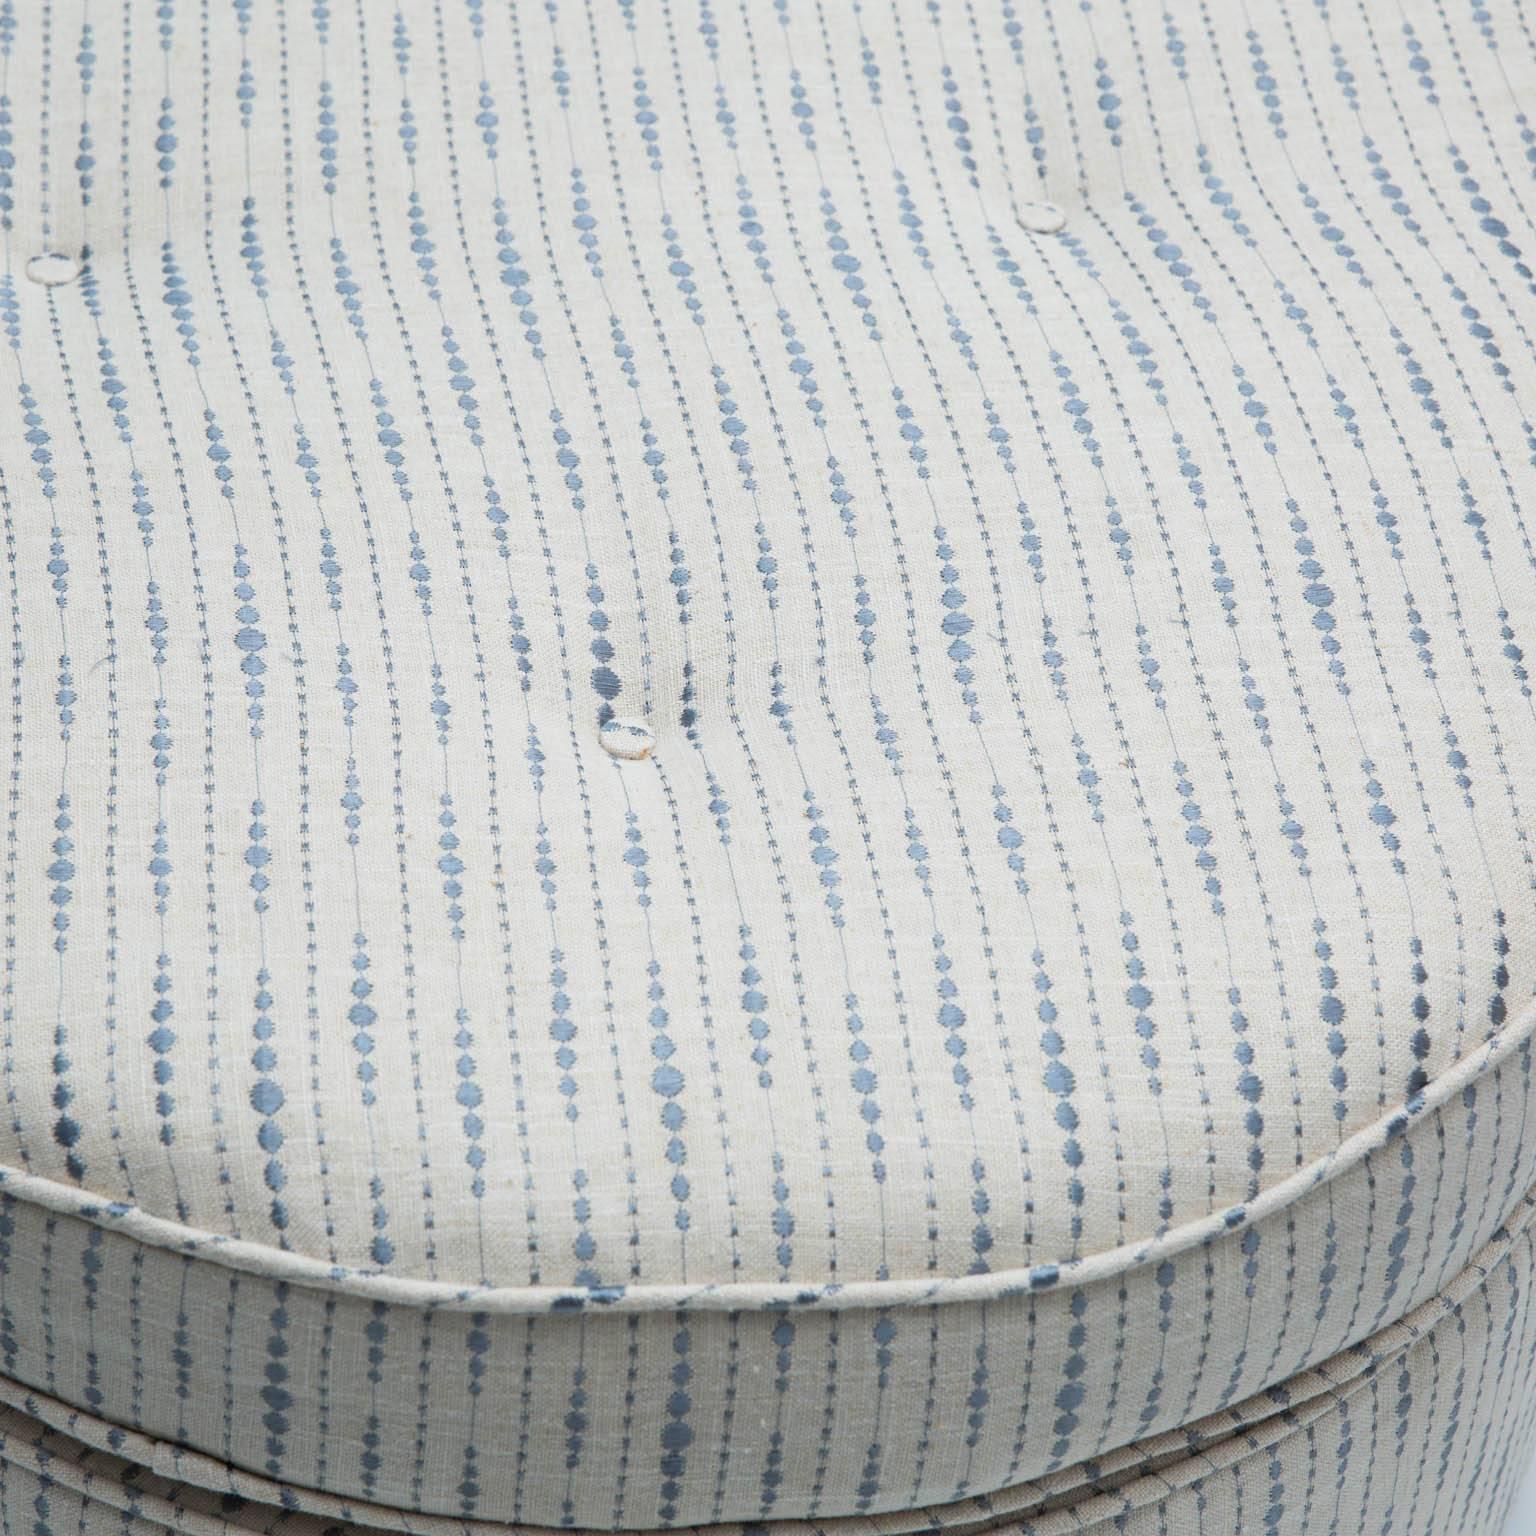 Newly upholstered ottoman with hidden wheels for ease of movement.